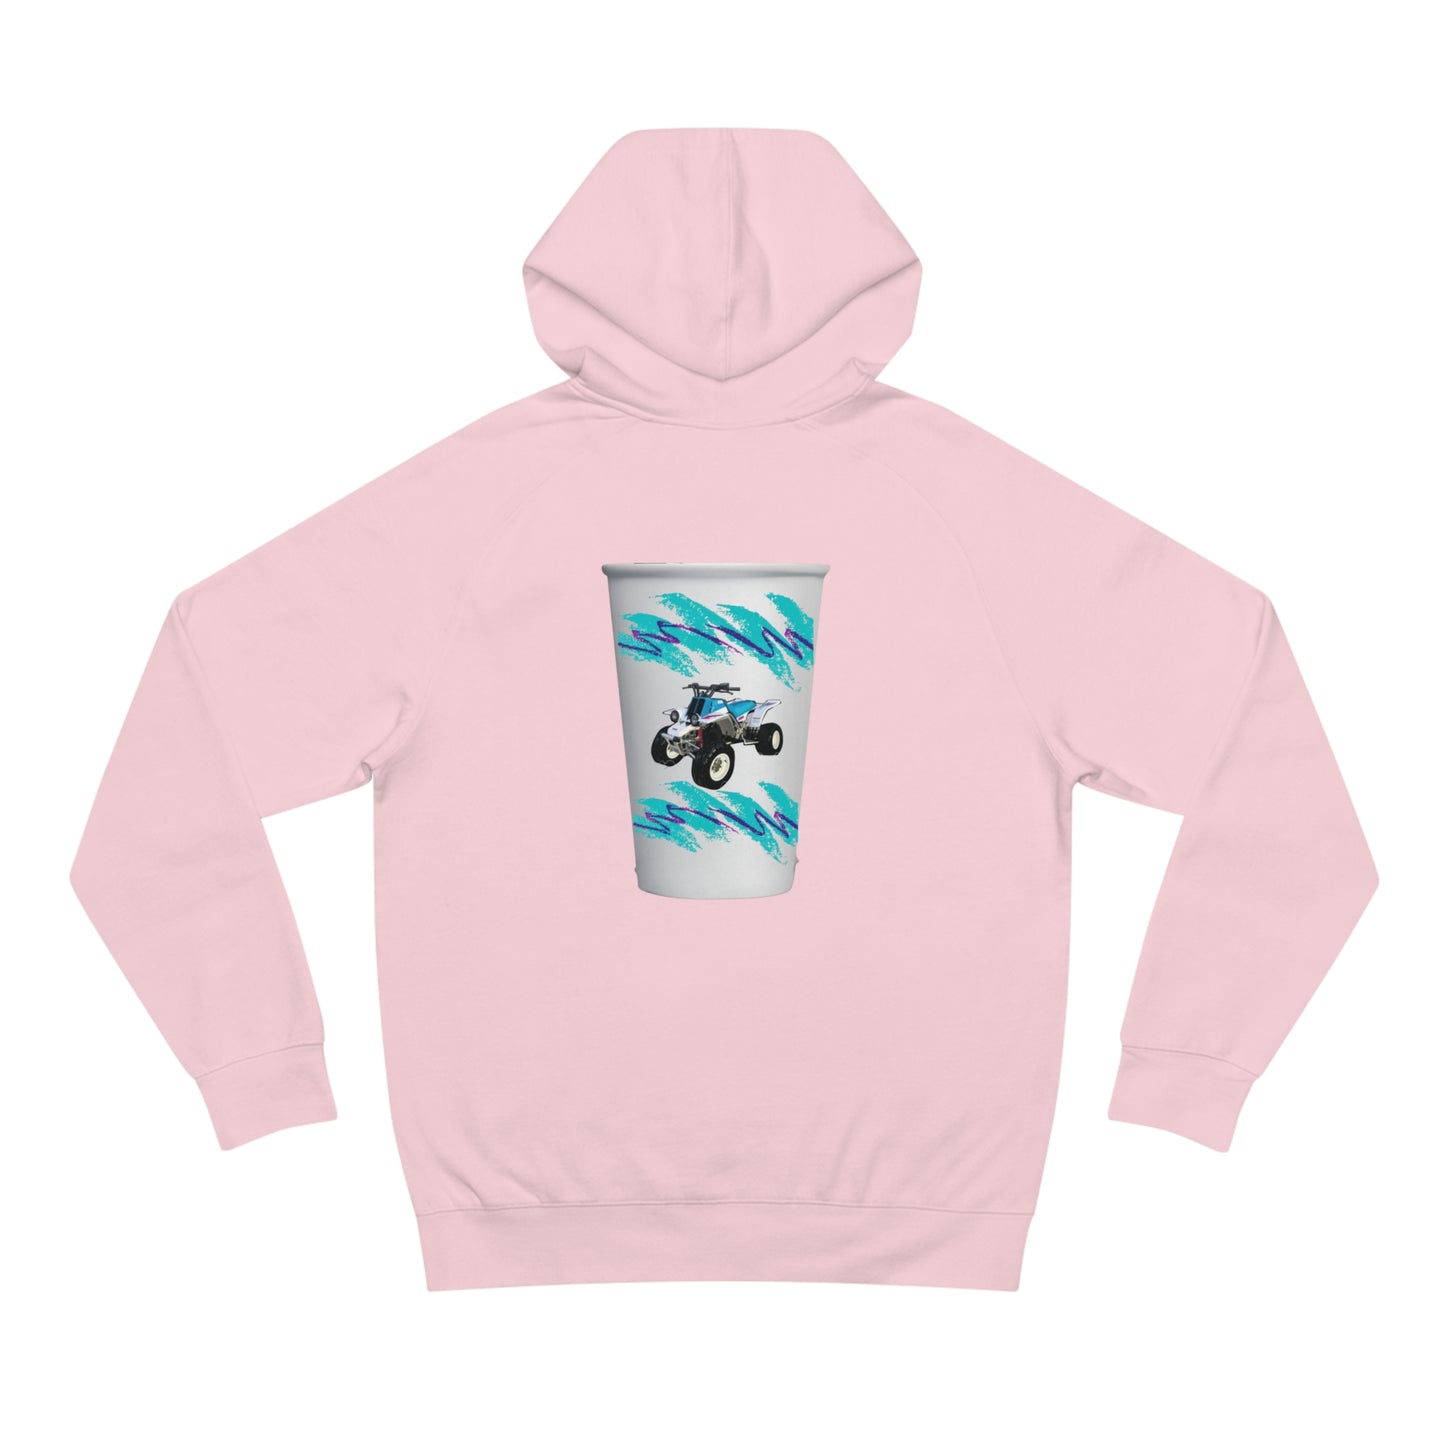 92 JAZZ BACK SIDE ONLY Hoodie